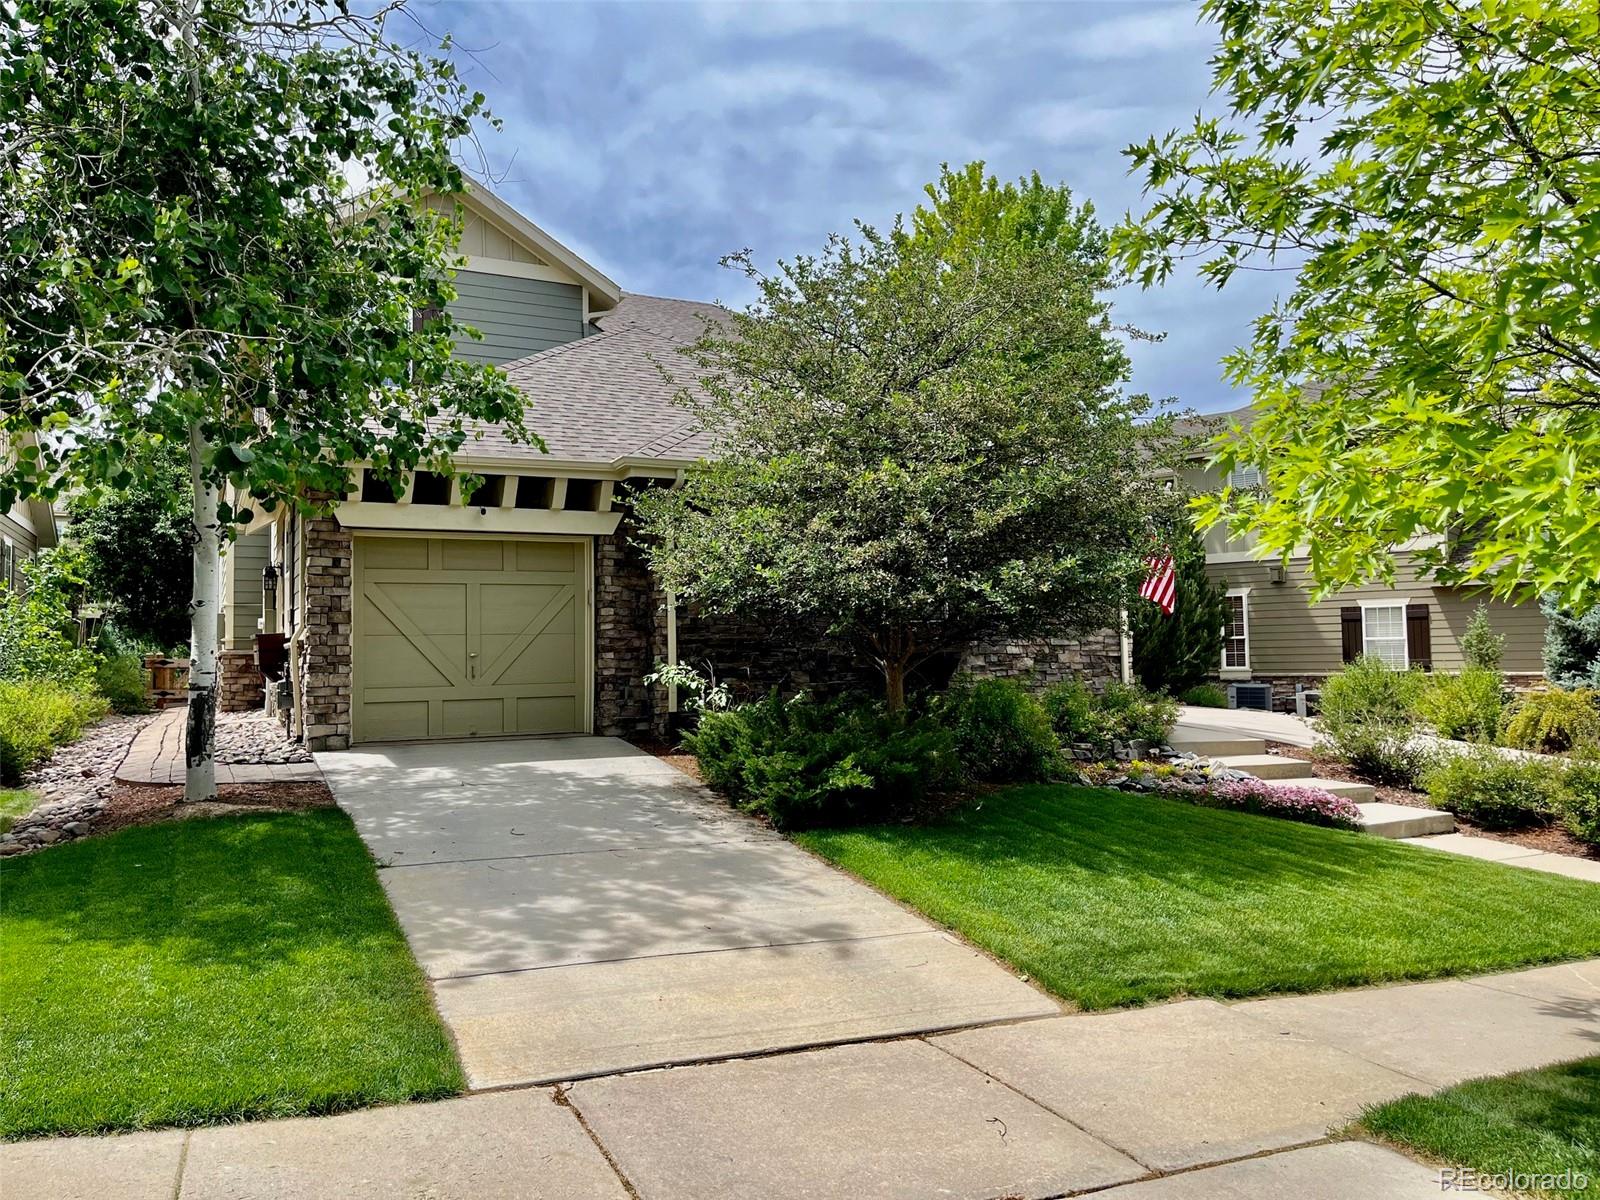 24540 e roxbury place, aurora sold home. Closed on 2024-05-10 for $830,000.